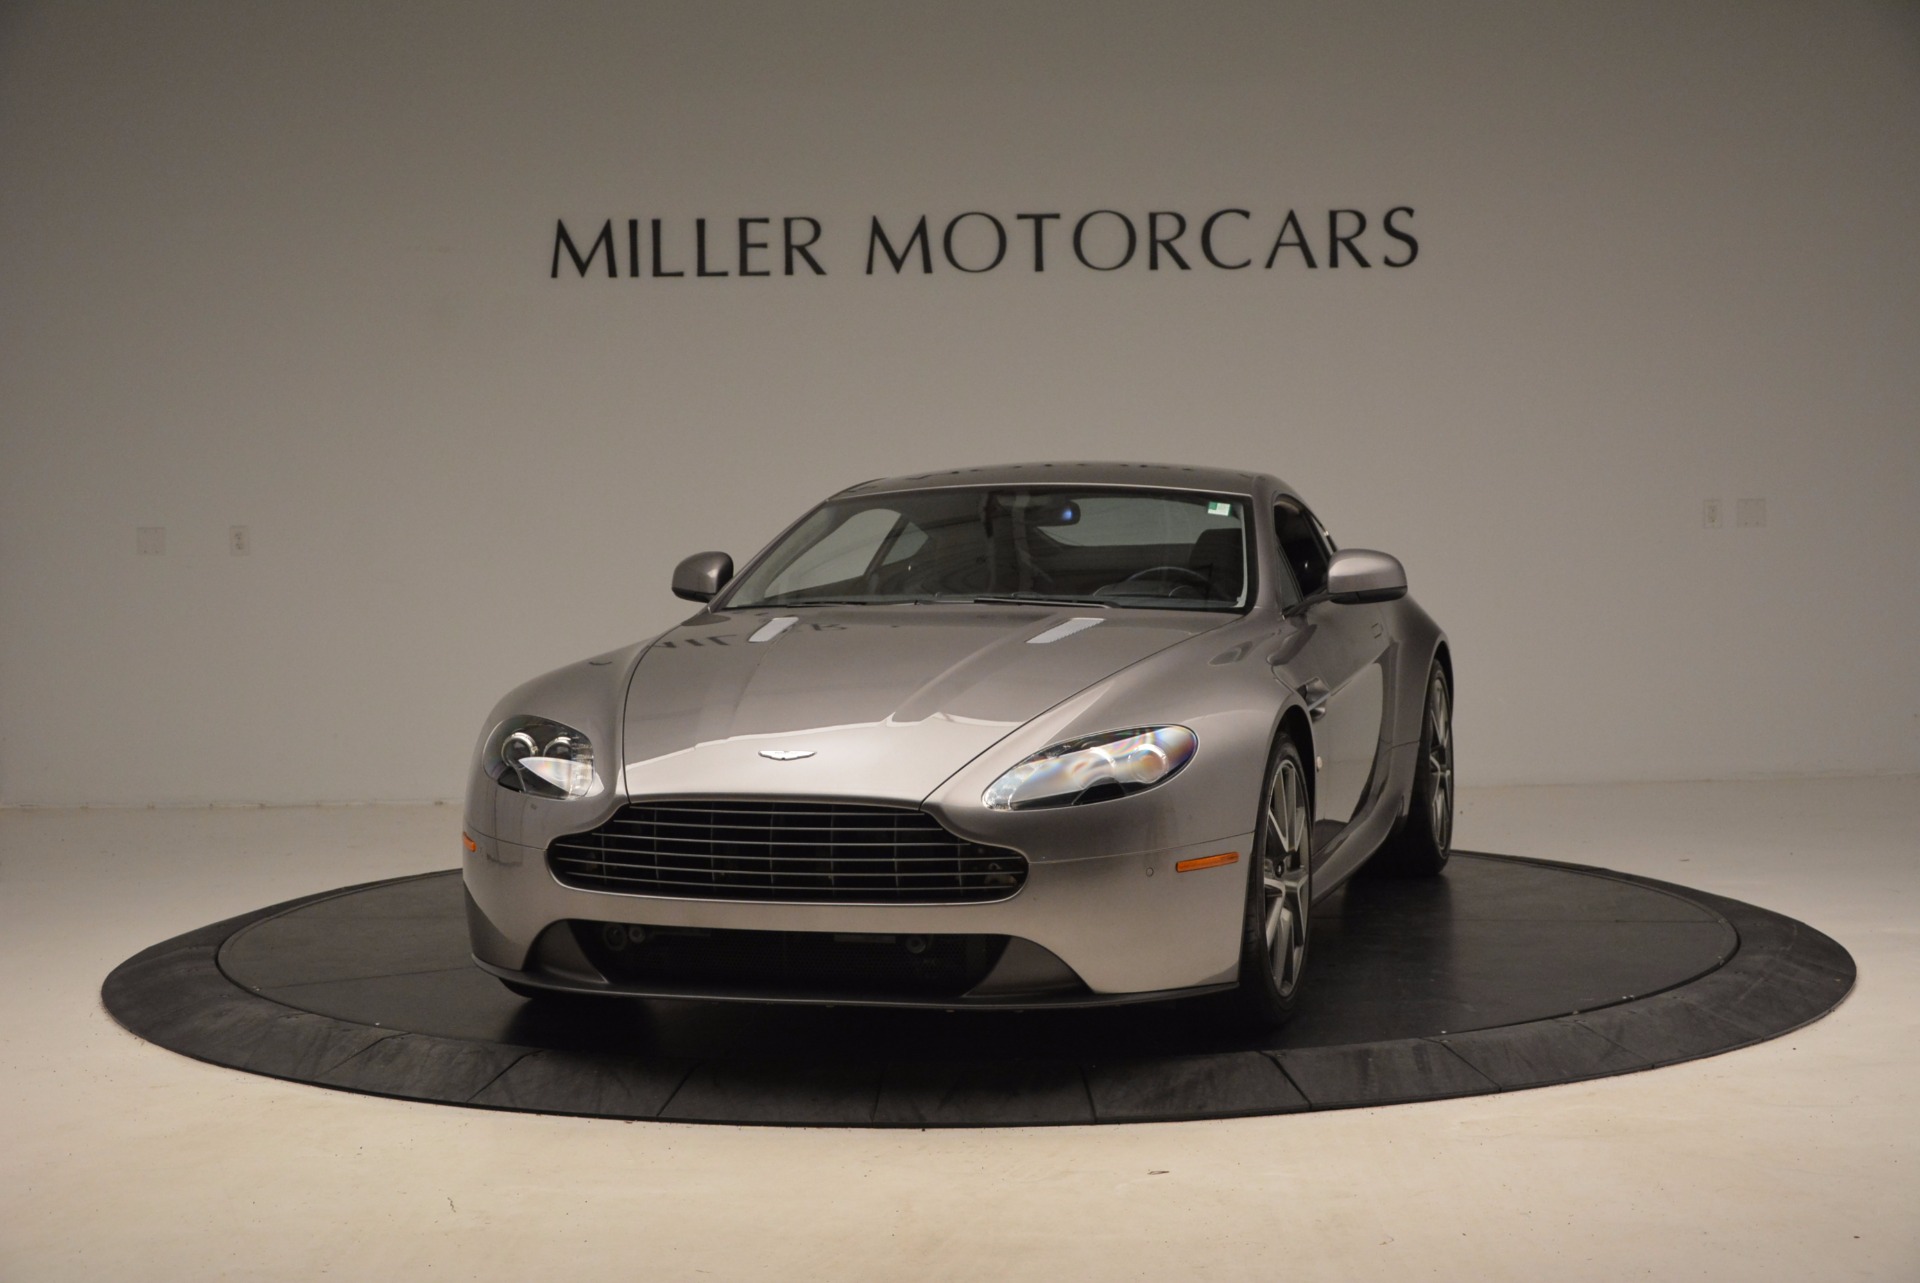 Used 2012 Aston Martin V8 Vantage for sale Sold at Bentley Greenwich in Greenwich CT 06830 1